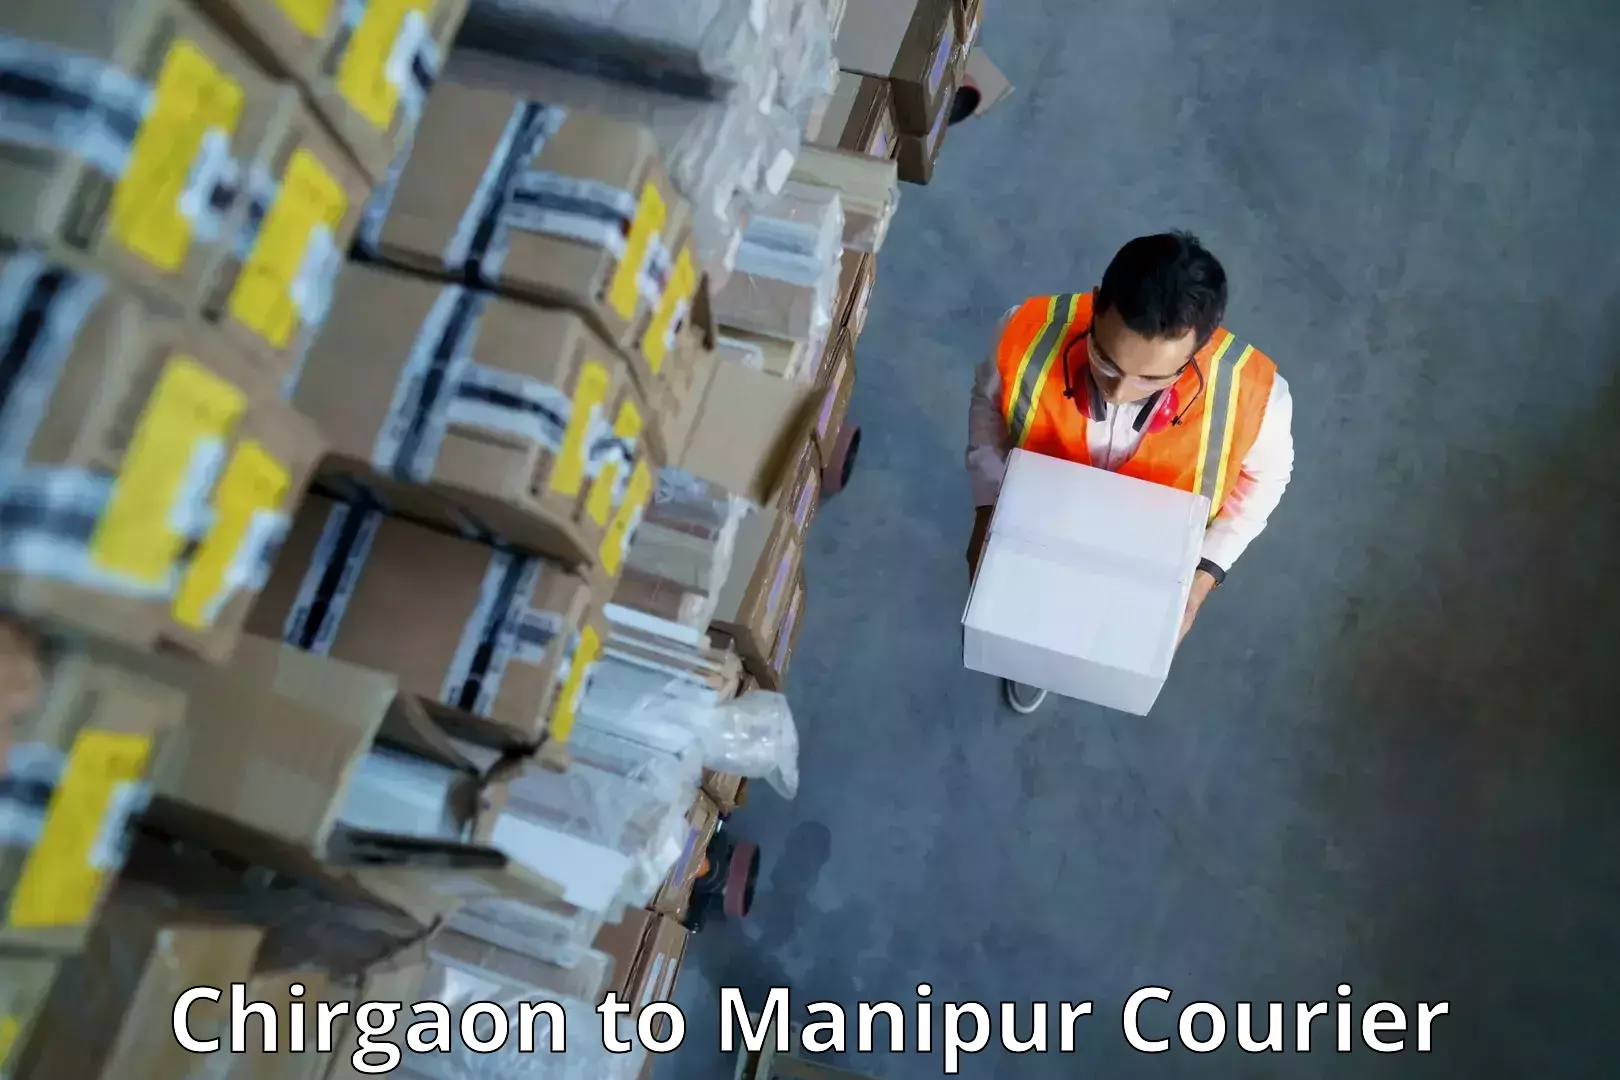 Advanced shipping network Chirgaon to Manipur